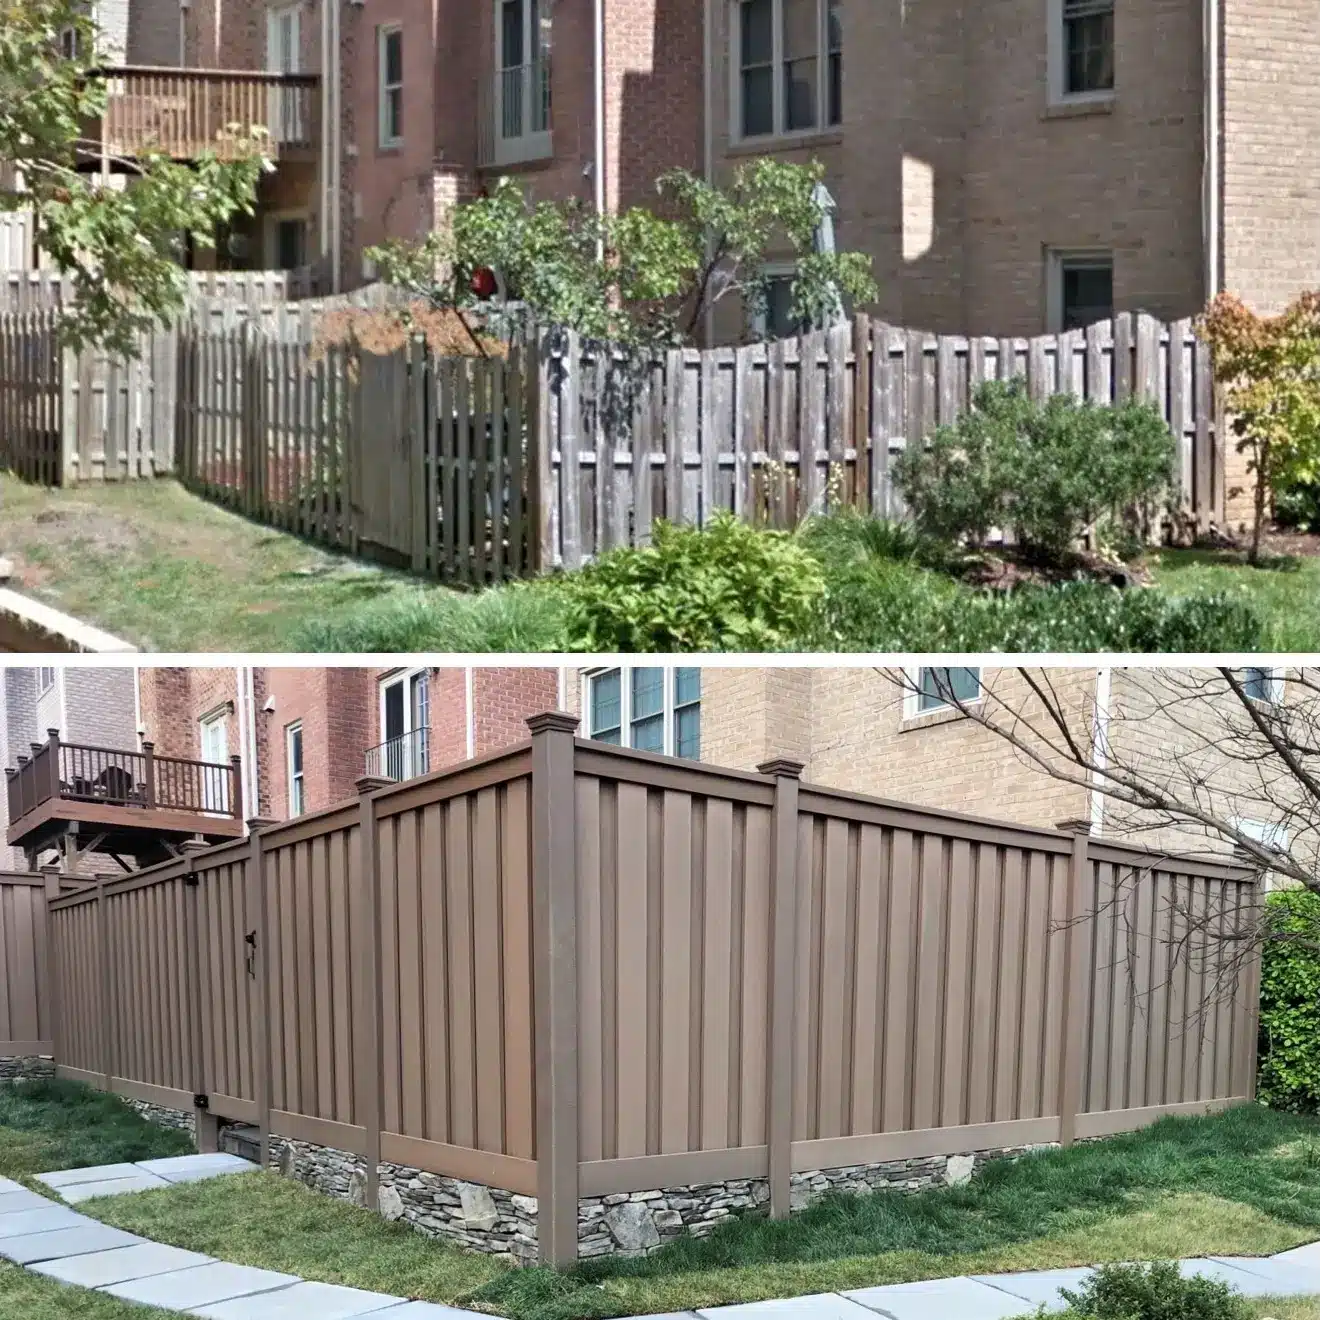 Trex Fencing Before and After - Replacing wood fence in Falls Church VA